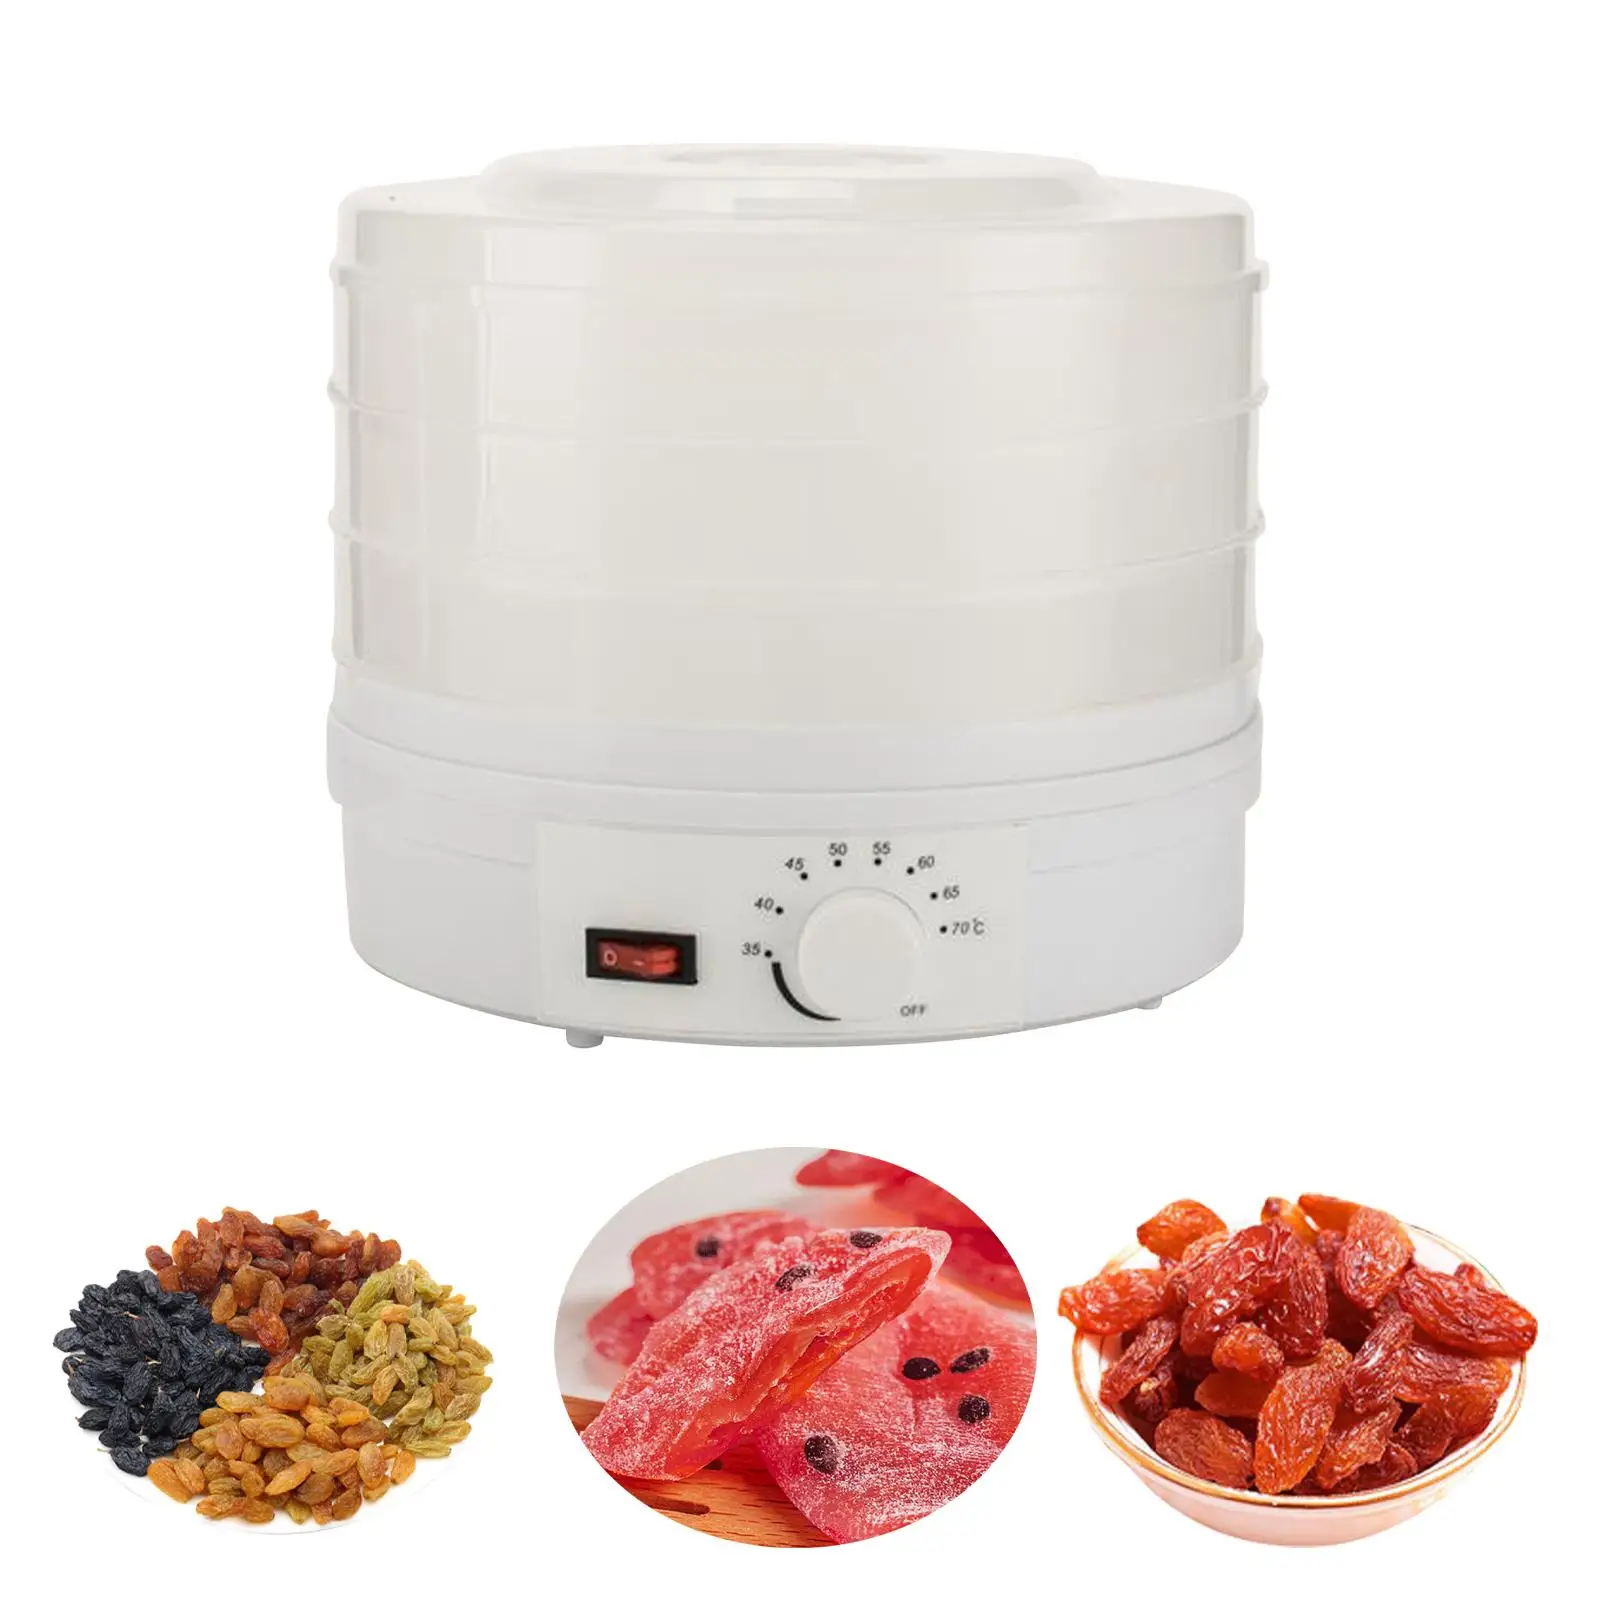 Fruit Dryer 3 Layer Dehydration Mute Dryer Machine Stackable Portable Dried Machine for Pet Food Meats Kitchen Vegetable Herbs